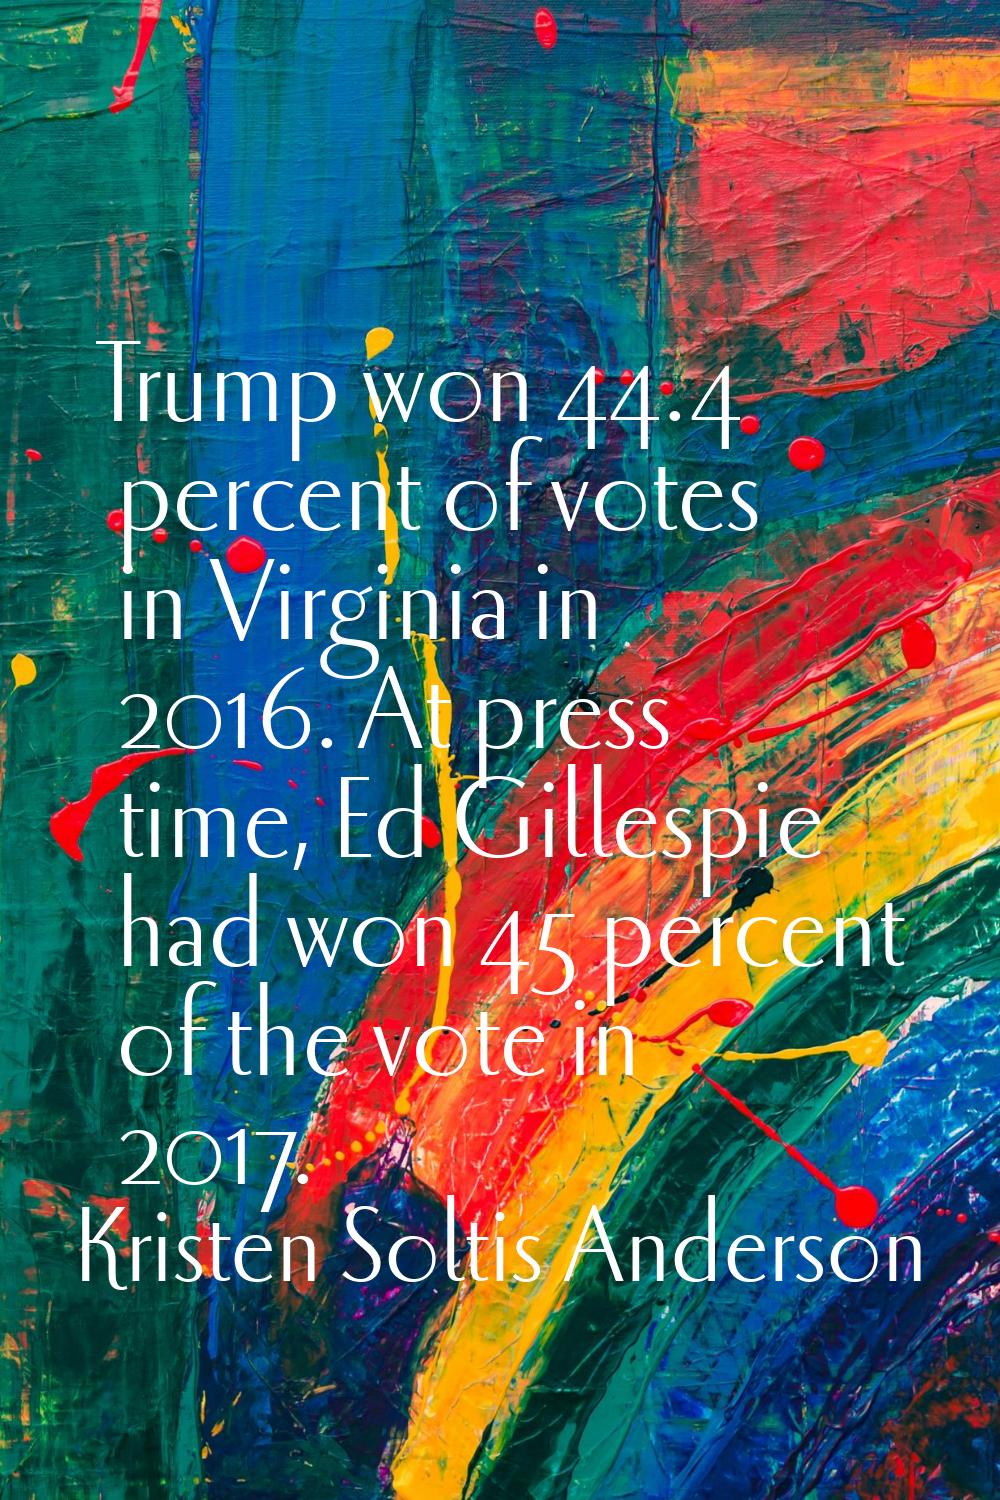 Trump won 44.4 percent of votes in Virginia in 2016. At press time, Ed Gillespie had won 45 percent